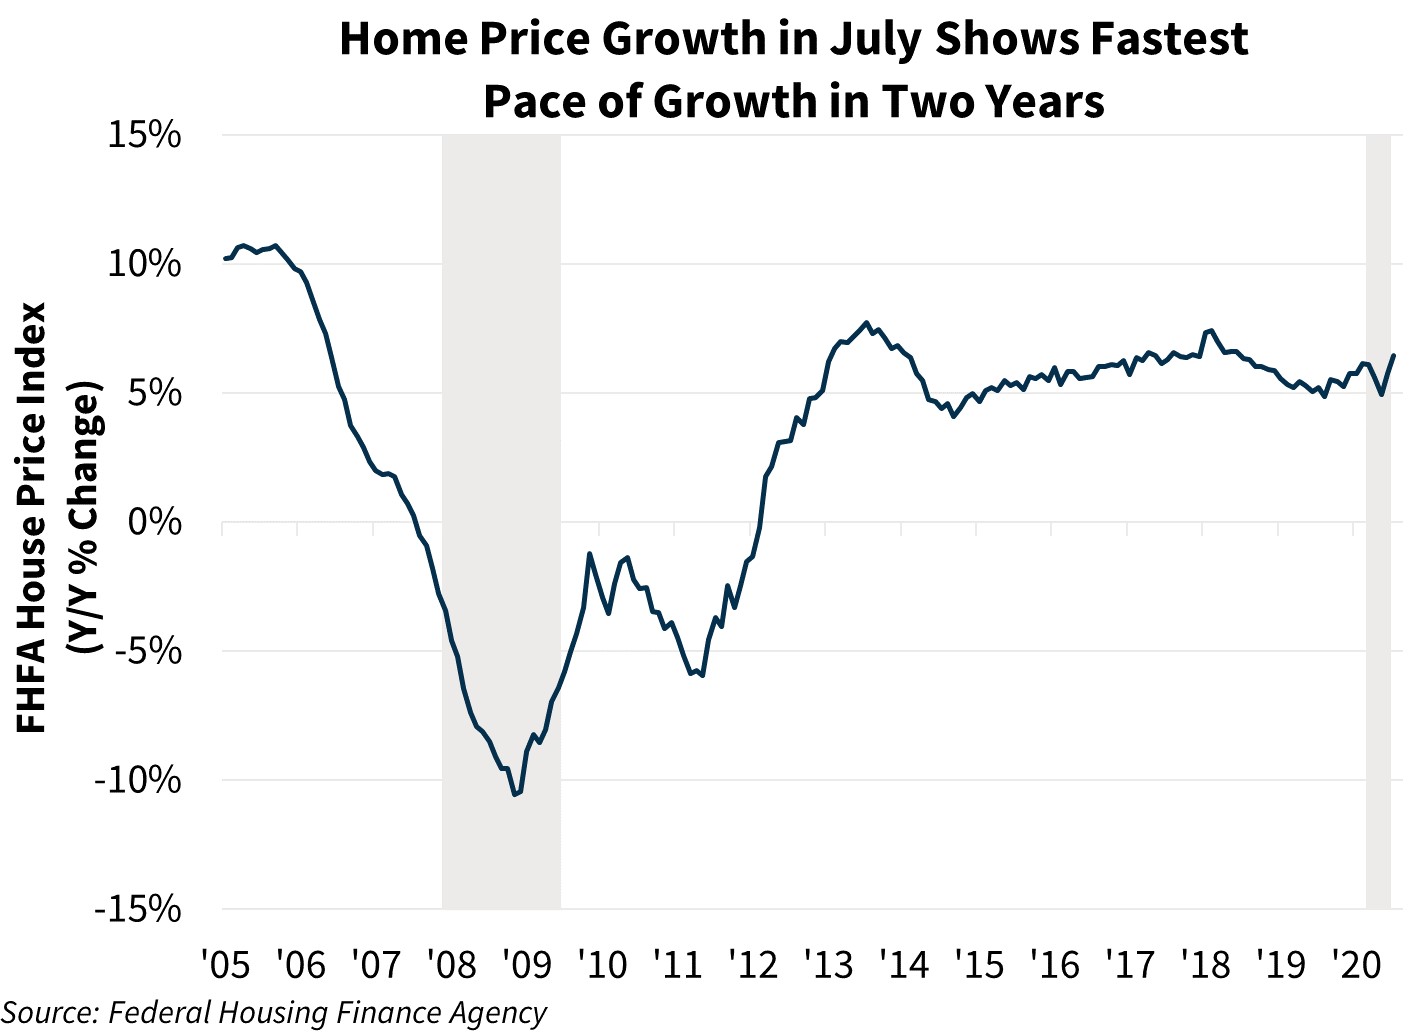  Home Price Growth in July Shows Fastest Pace of Growth in Two Years 